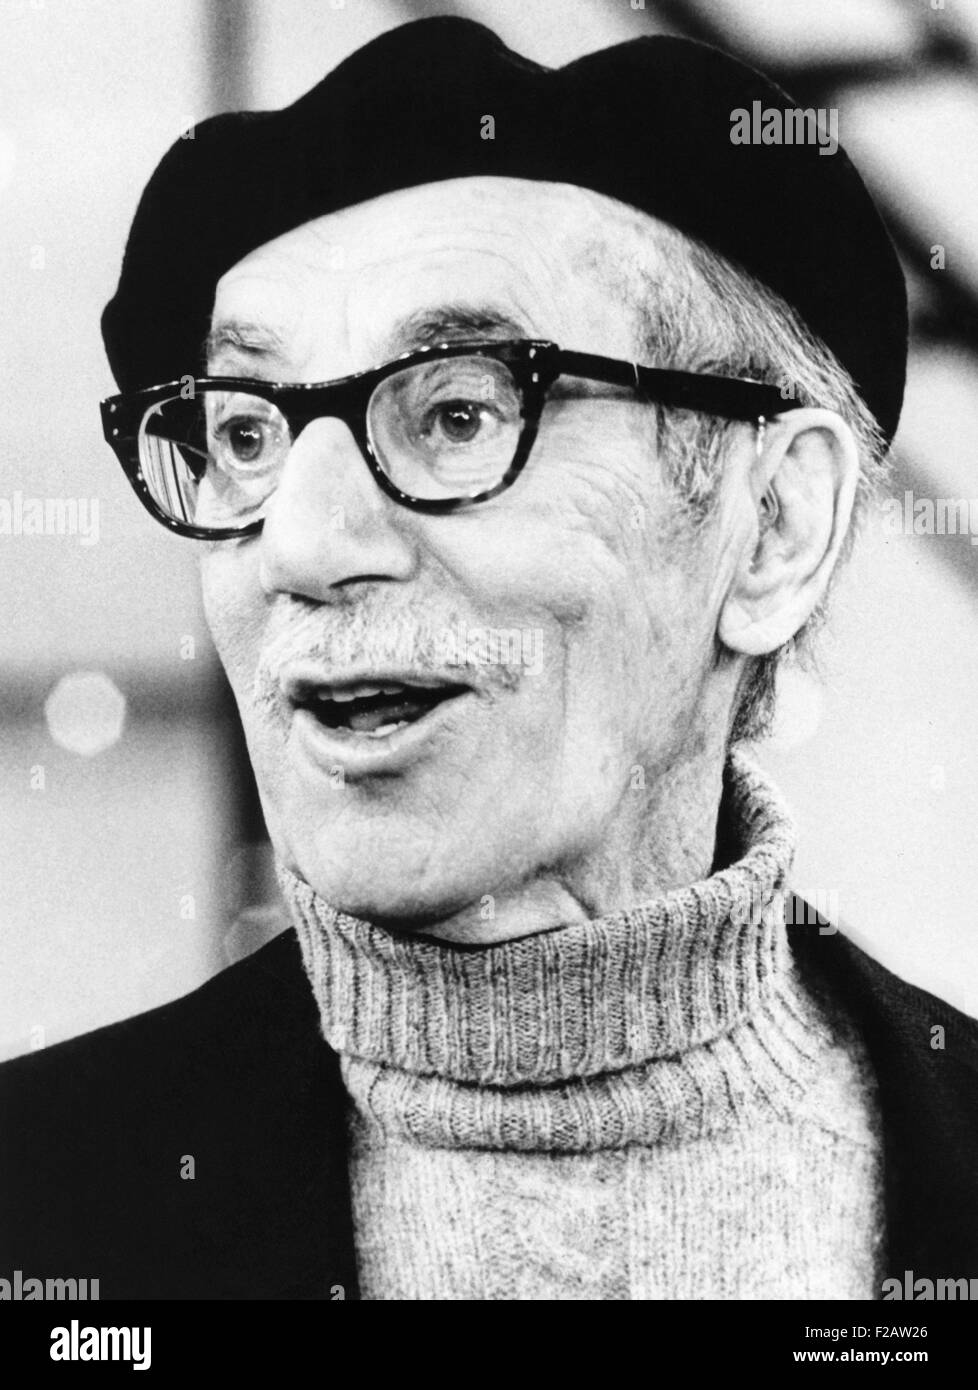 Comedian Groucho Marx at a press conference in May 1972. He was discussing the one-man show, AN EVENING WITH GROUCHO at Carnegie Hall on May 20, 1972. (CSU 2015 11 1480) Stock Photo